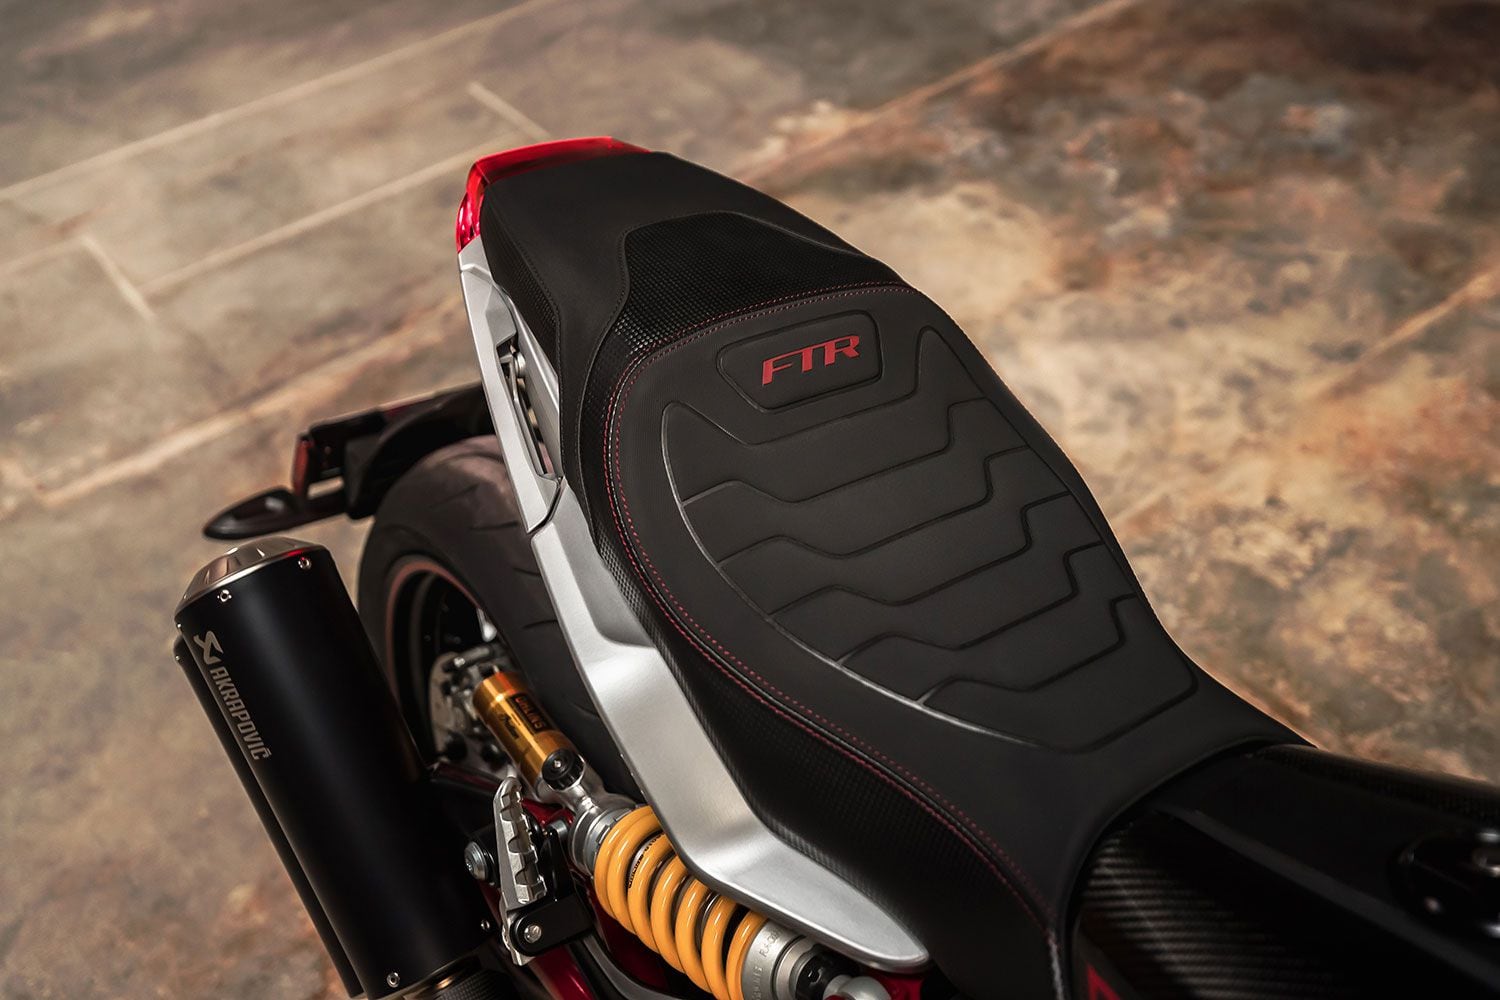 The new sporty seat and raw aluminum tailsection of the top-shelf FTR R Carbon.